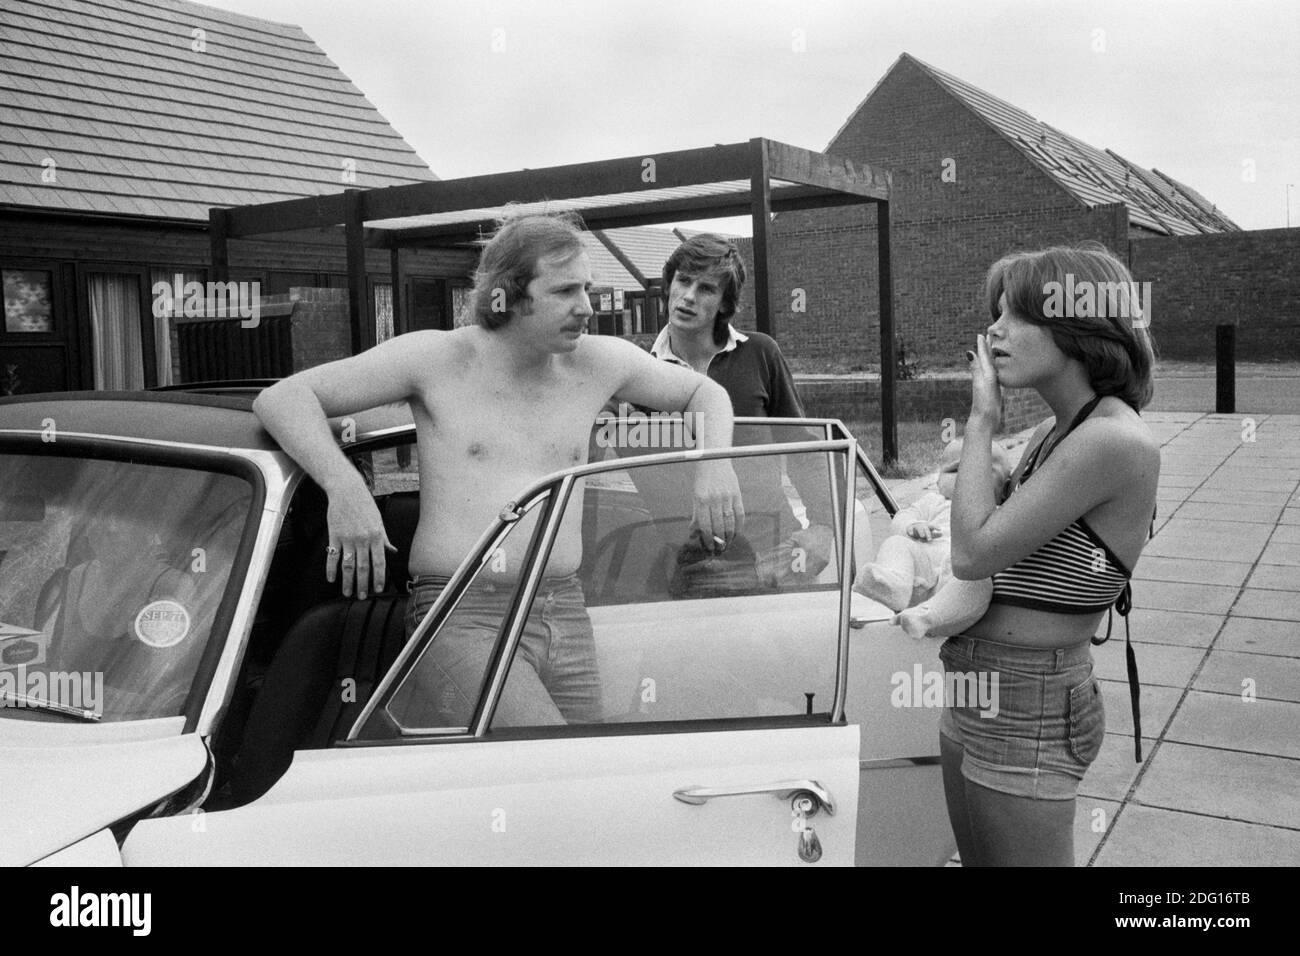 1970s UK, professional middle class couple outside their new modern home on a recently built new housing development. Hanging out with the new baby in arms by their car that is parked out side their home. The shirtless man is the car owner and father.   Its summer  and a friend is up for the day to see the new house. 1977 England. HOMER SYKES Stock Photo